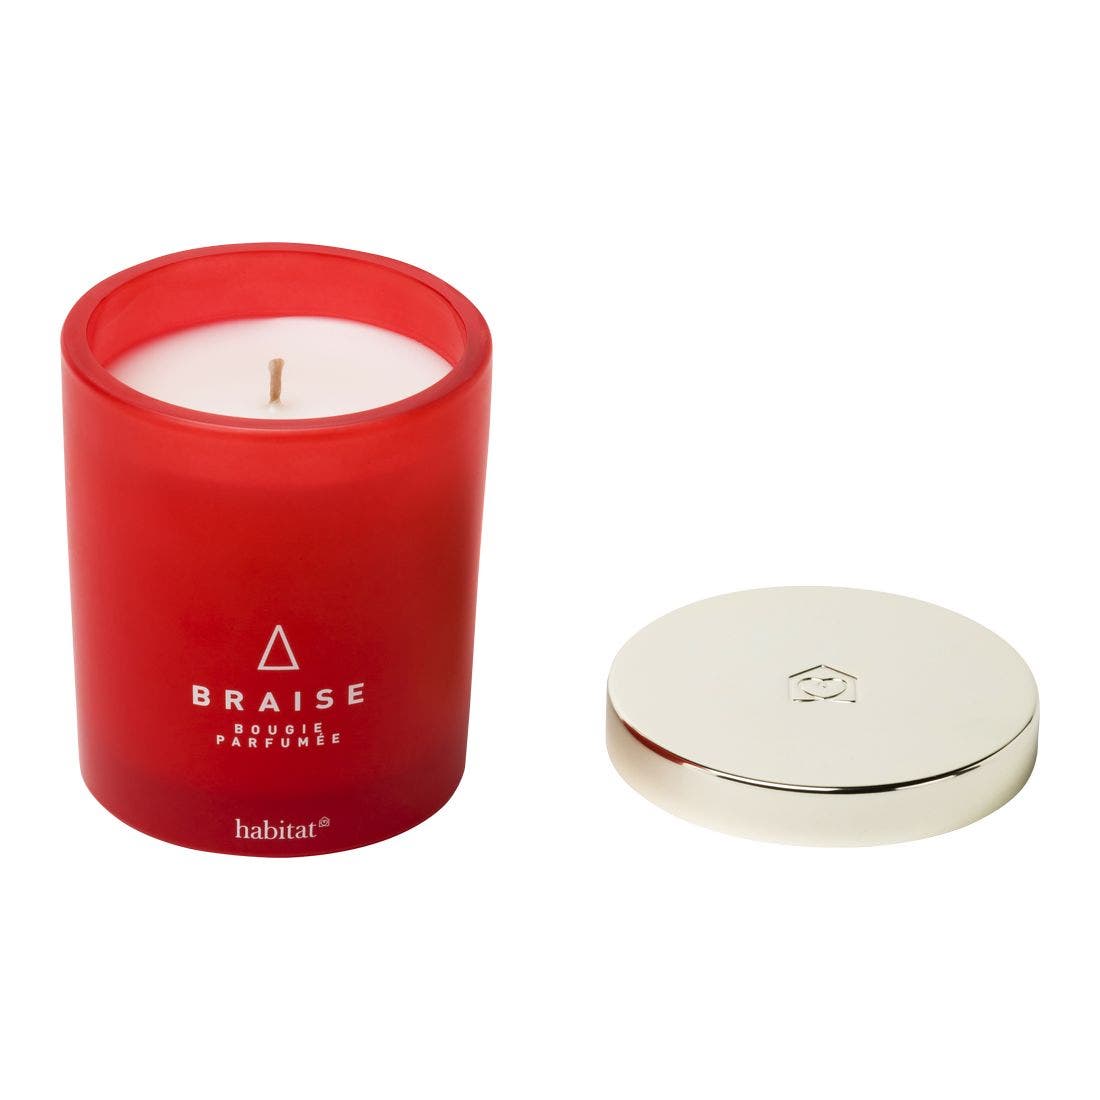 25021421-pure-cardinal-health-fitness-aromatherapy-spa-candle-candle-accessories-01